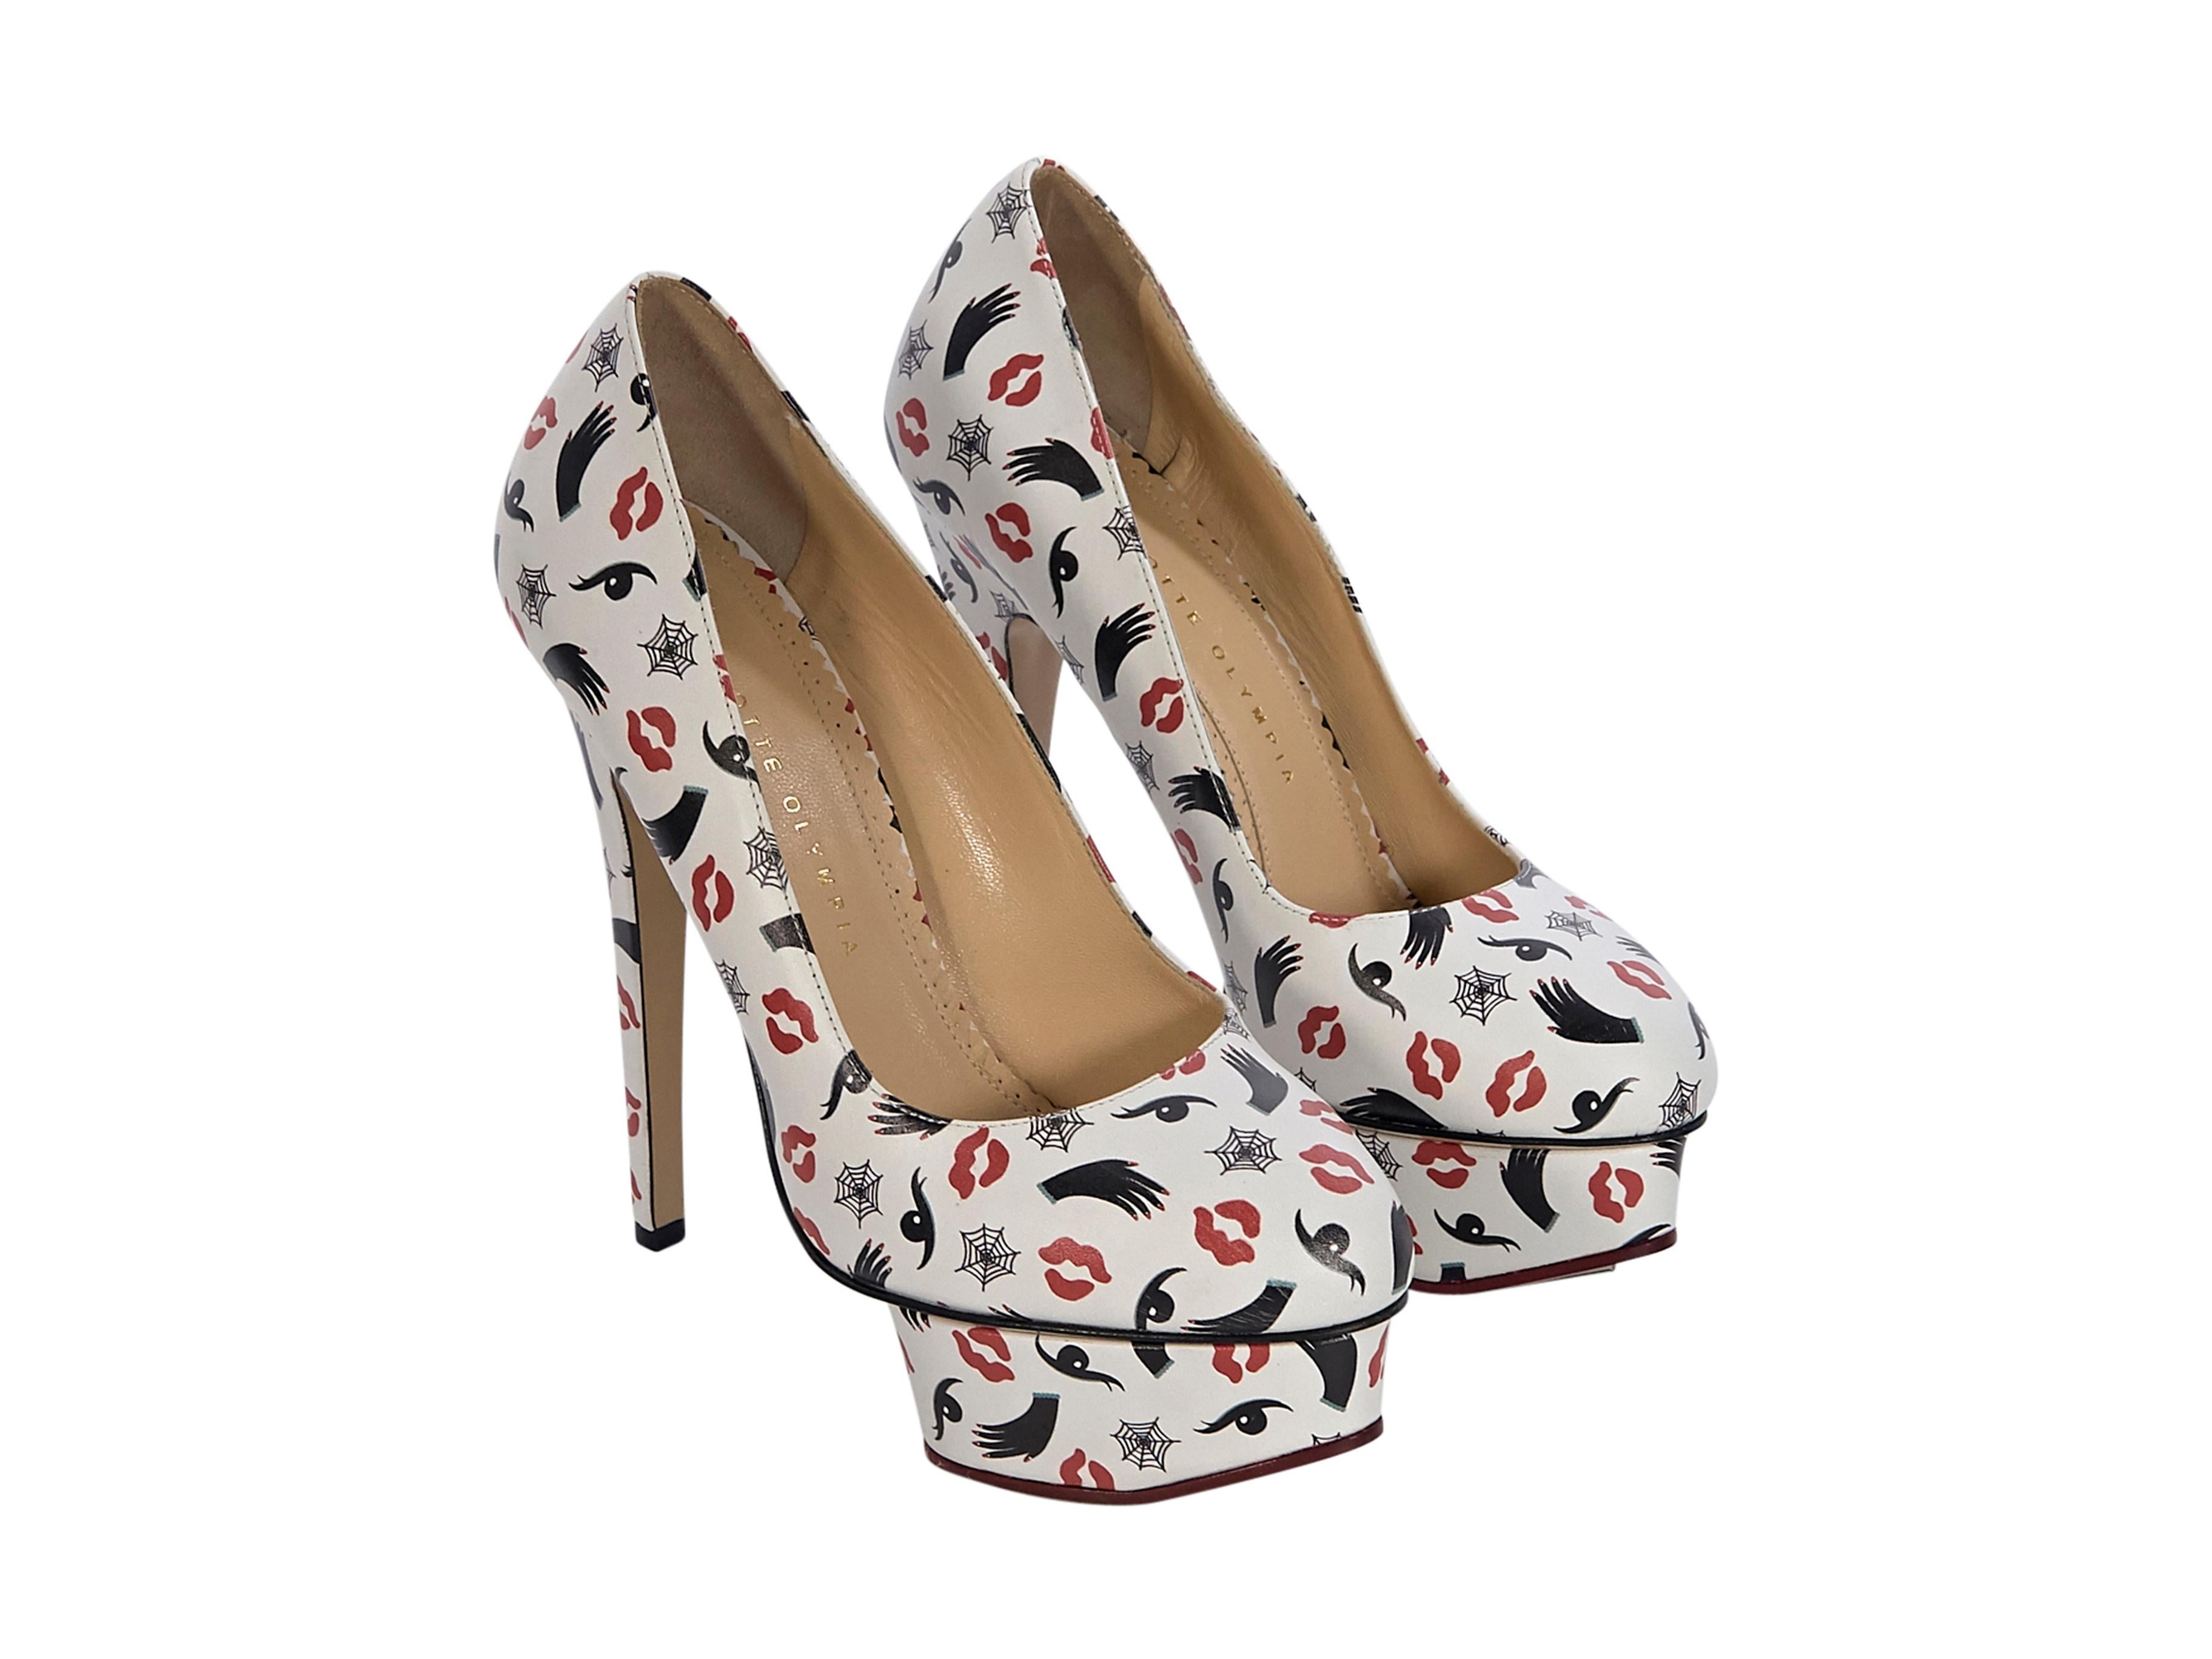 Product details:  White leather printed platform pumps by Charlotte Olympia.  Round-toe. Slip-on style. Wear yours with high-waist straight-leg pants. 5.5